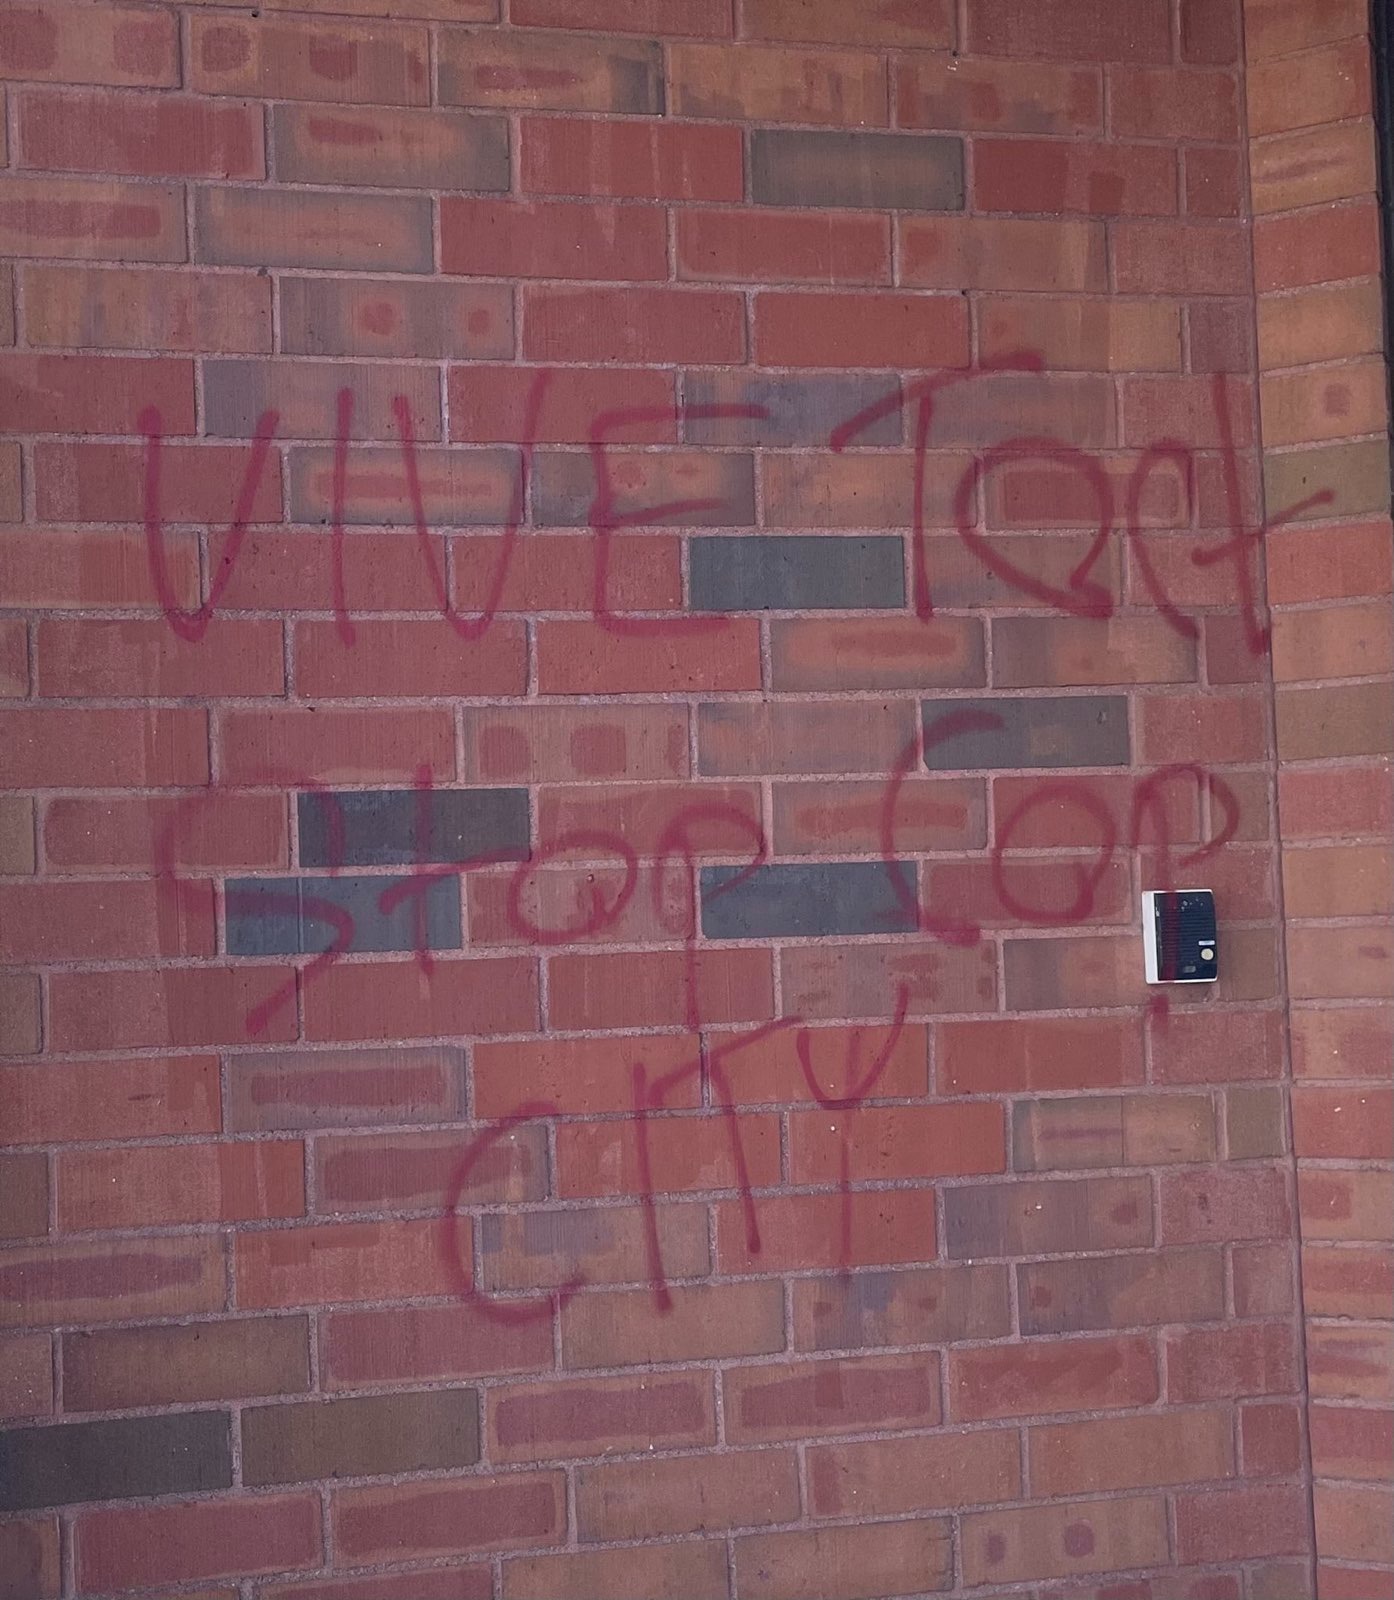 A brick wall with an intercom is tagged "VIVE TORT STOP COP CITY" in red spray paint.